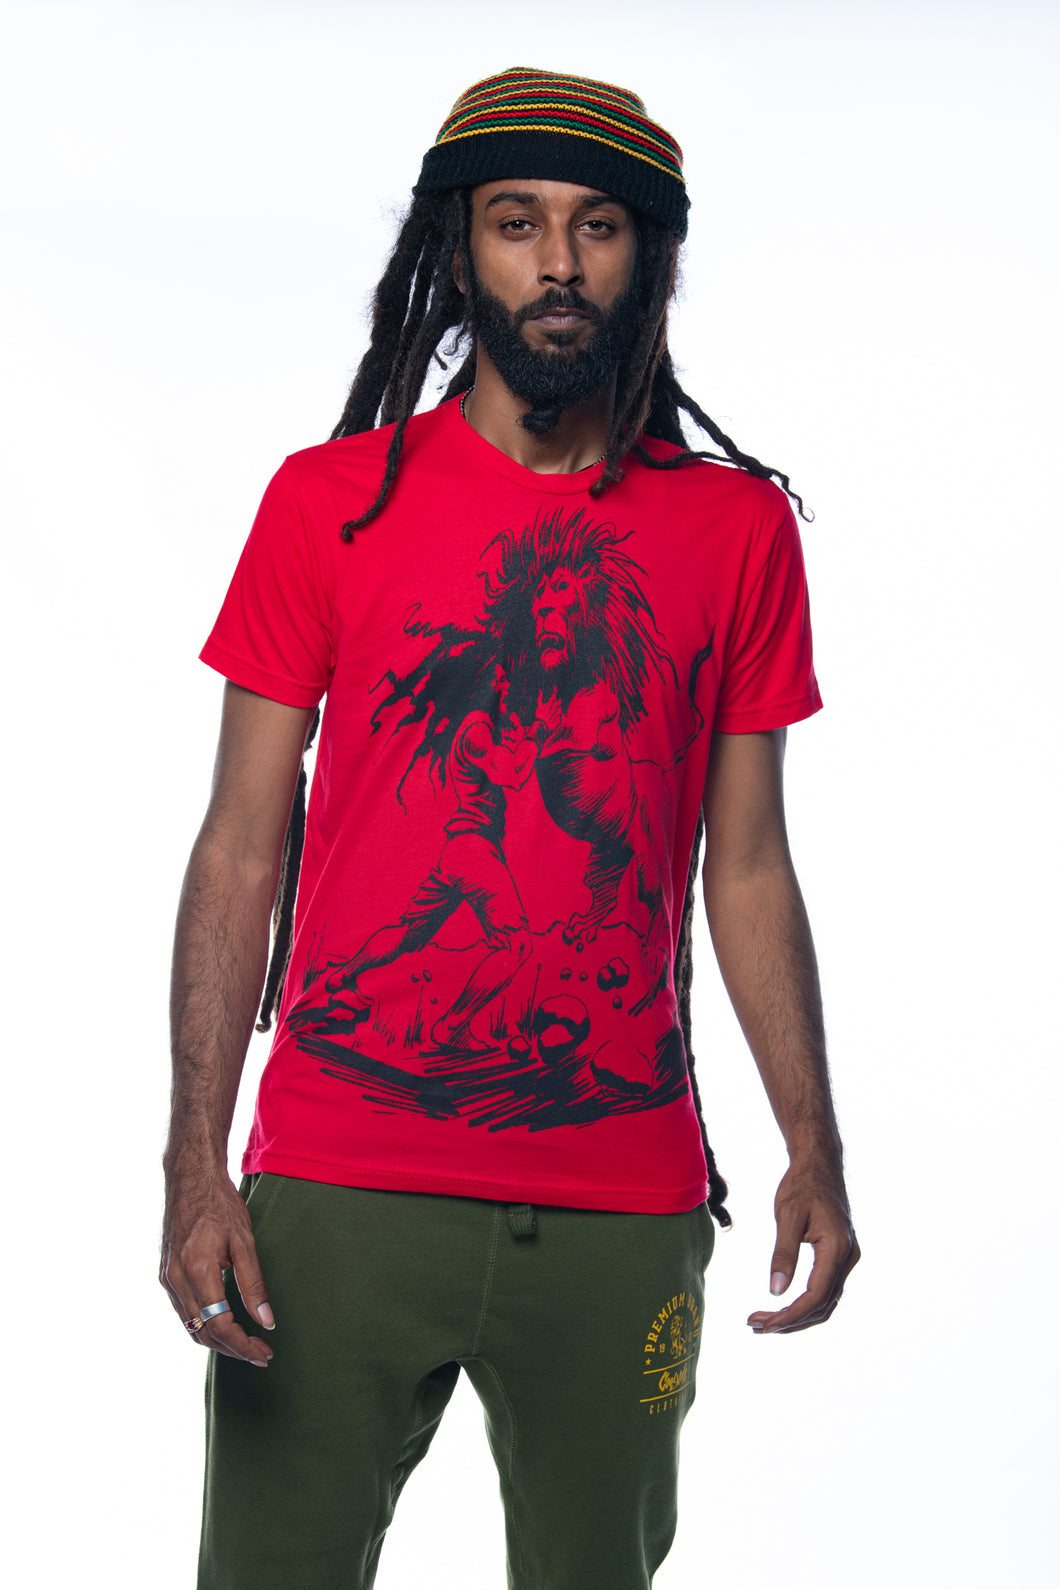 Cooyah Jamaican clothing brand,  Dread and Lion men's red graphic tee. Rasta man with dreads artwork screen printed design on soft, 100% ringspun cotton.